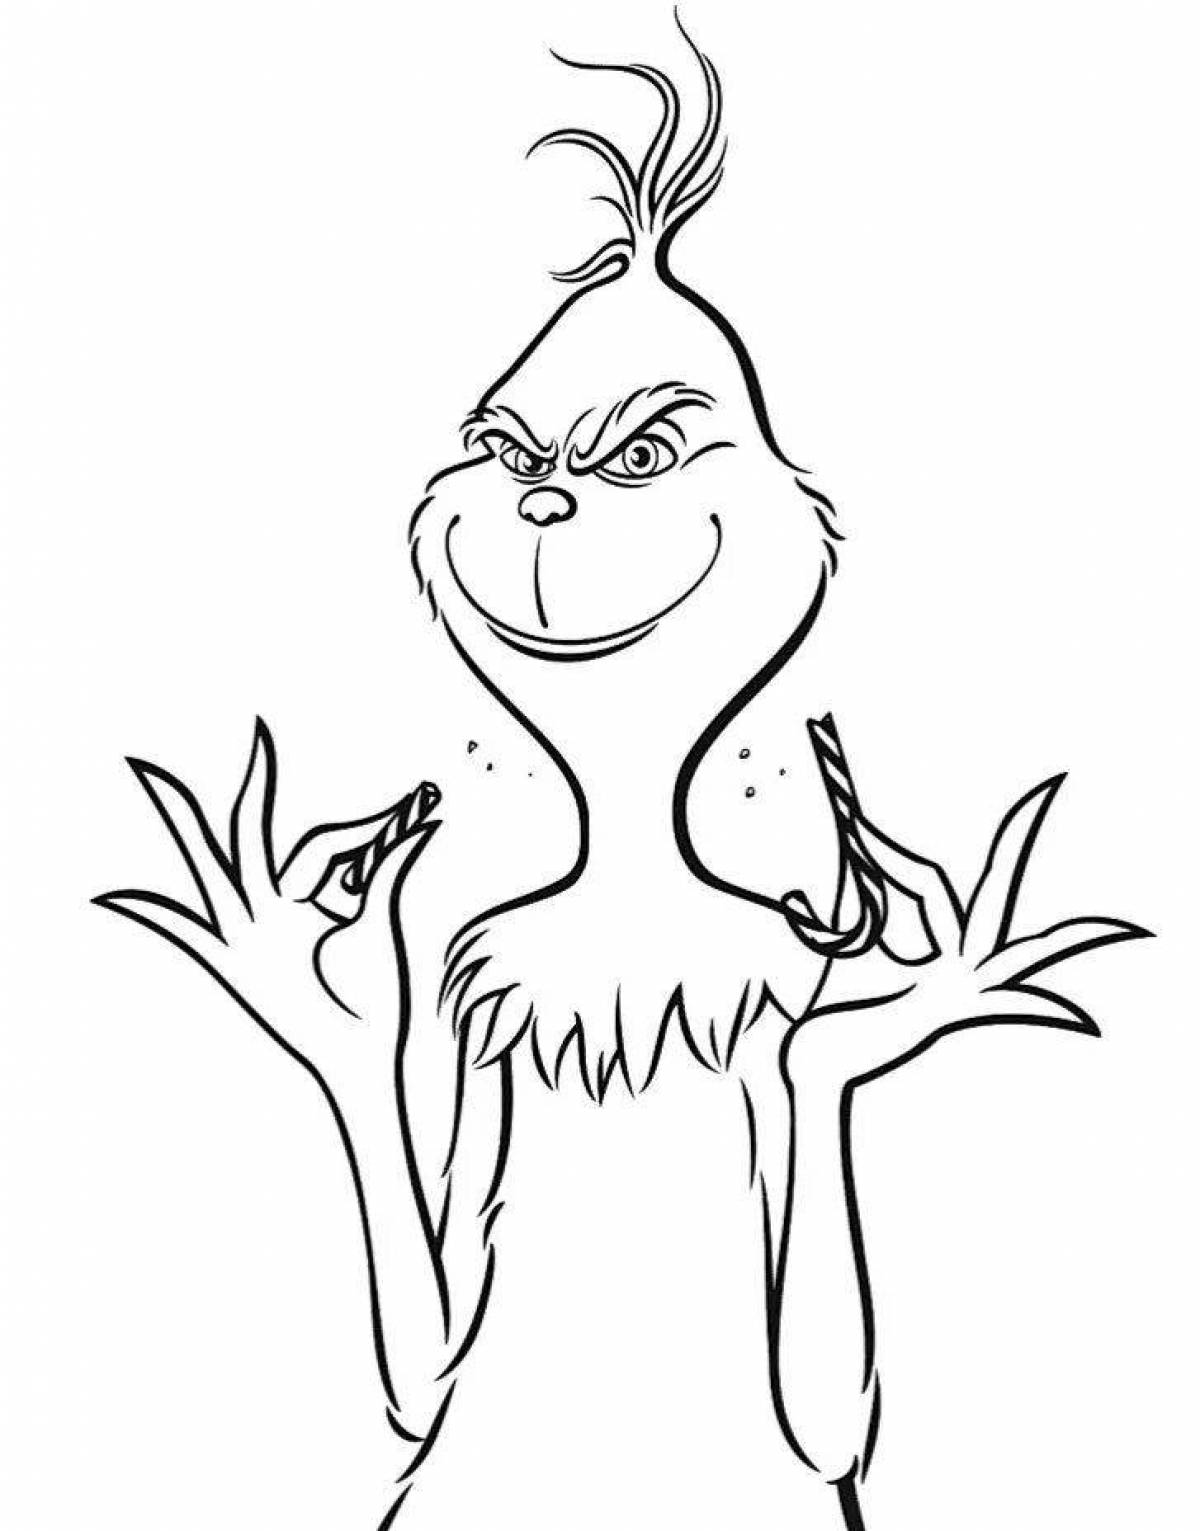 Coloring page bright grinch stole christmas